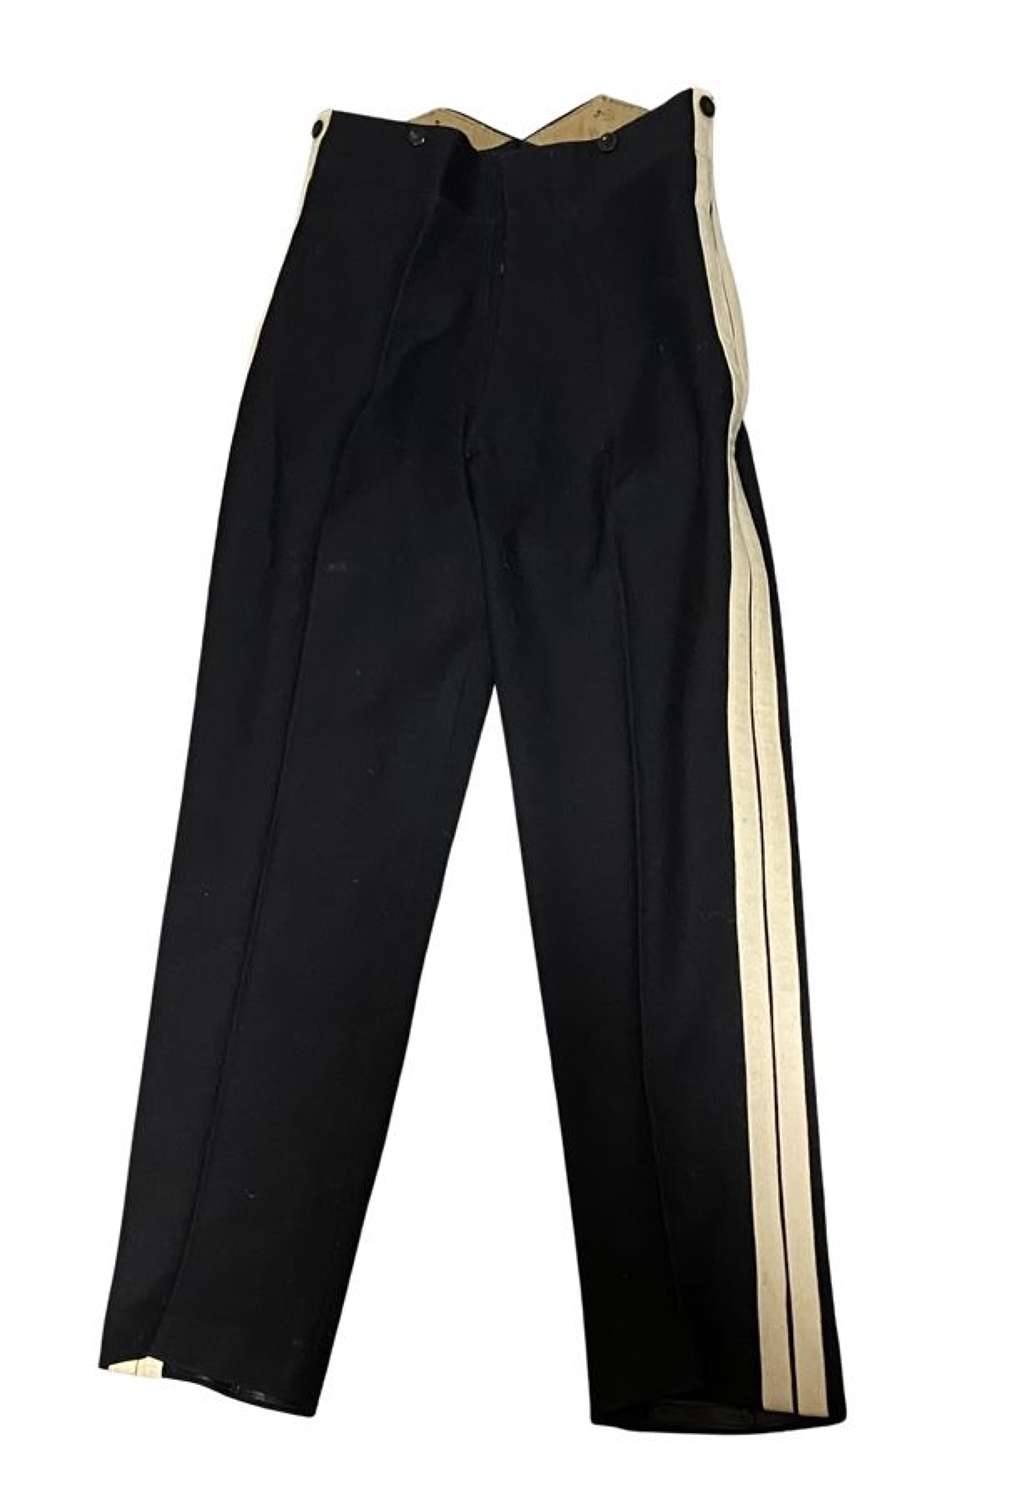 Pair of British Royal Corps of Transport No1 Dress Trousers 1957